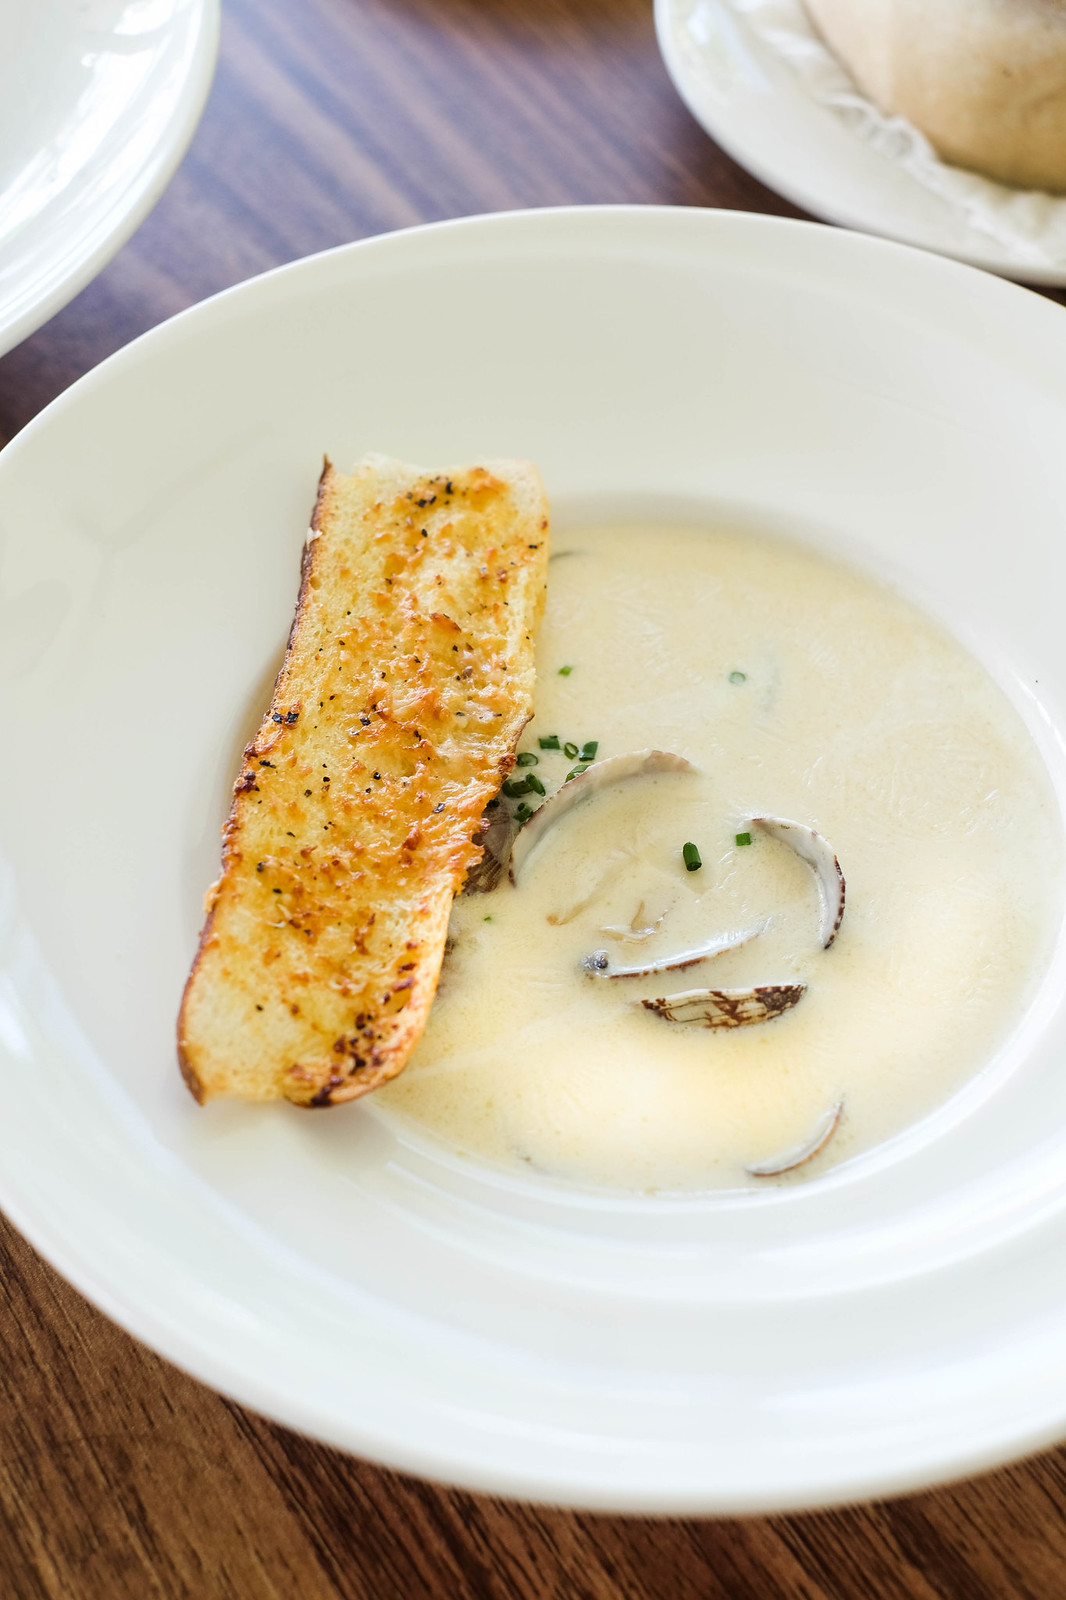 The Seagrill Clam Chowder